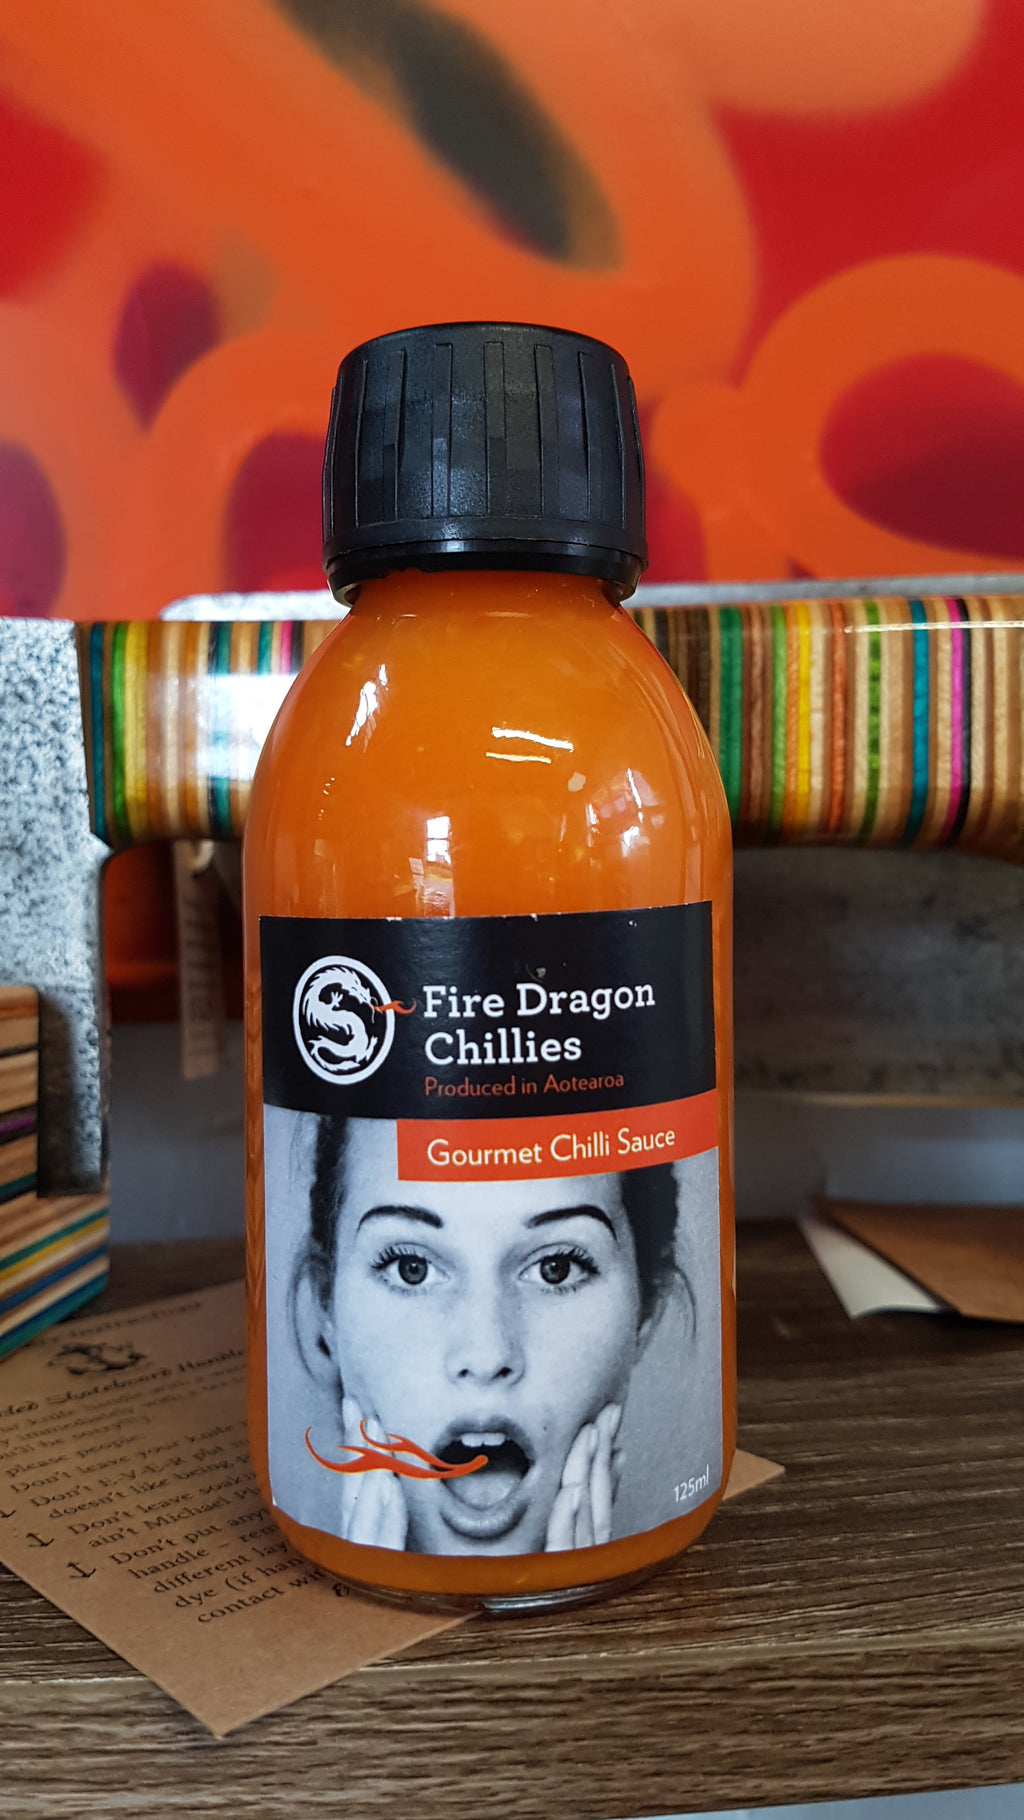 Gourmet Chilli Sauce 125ml by Fire Dragon Chillies